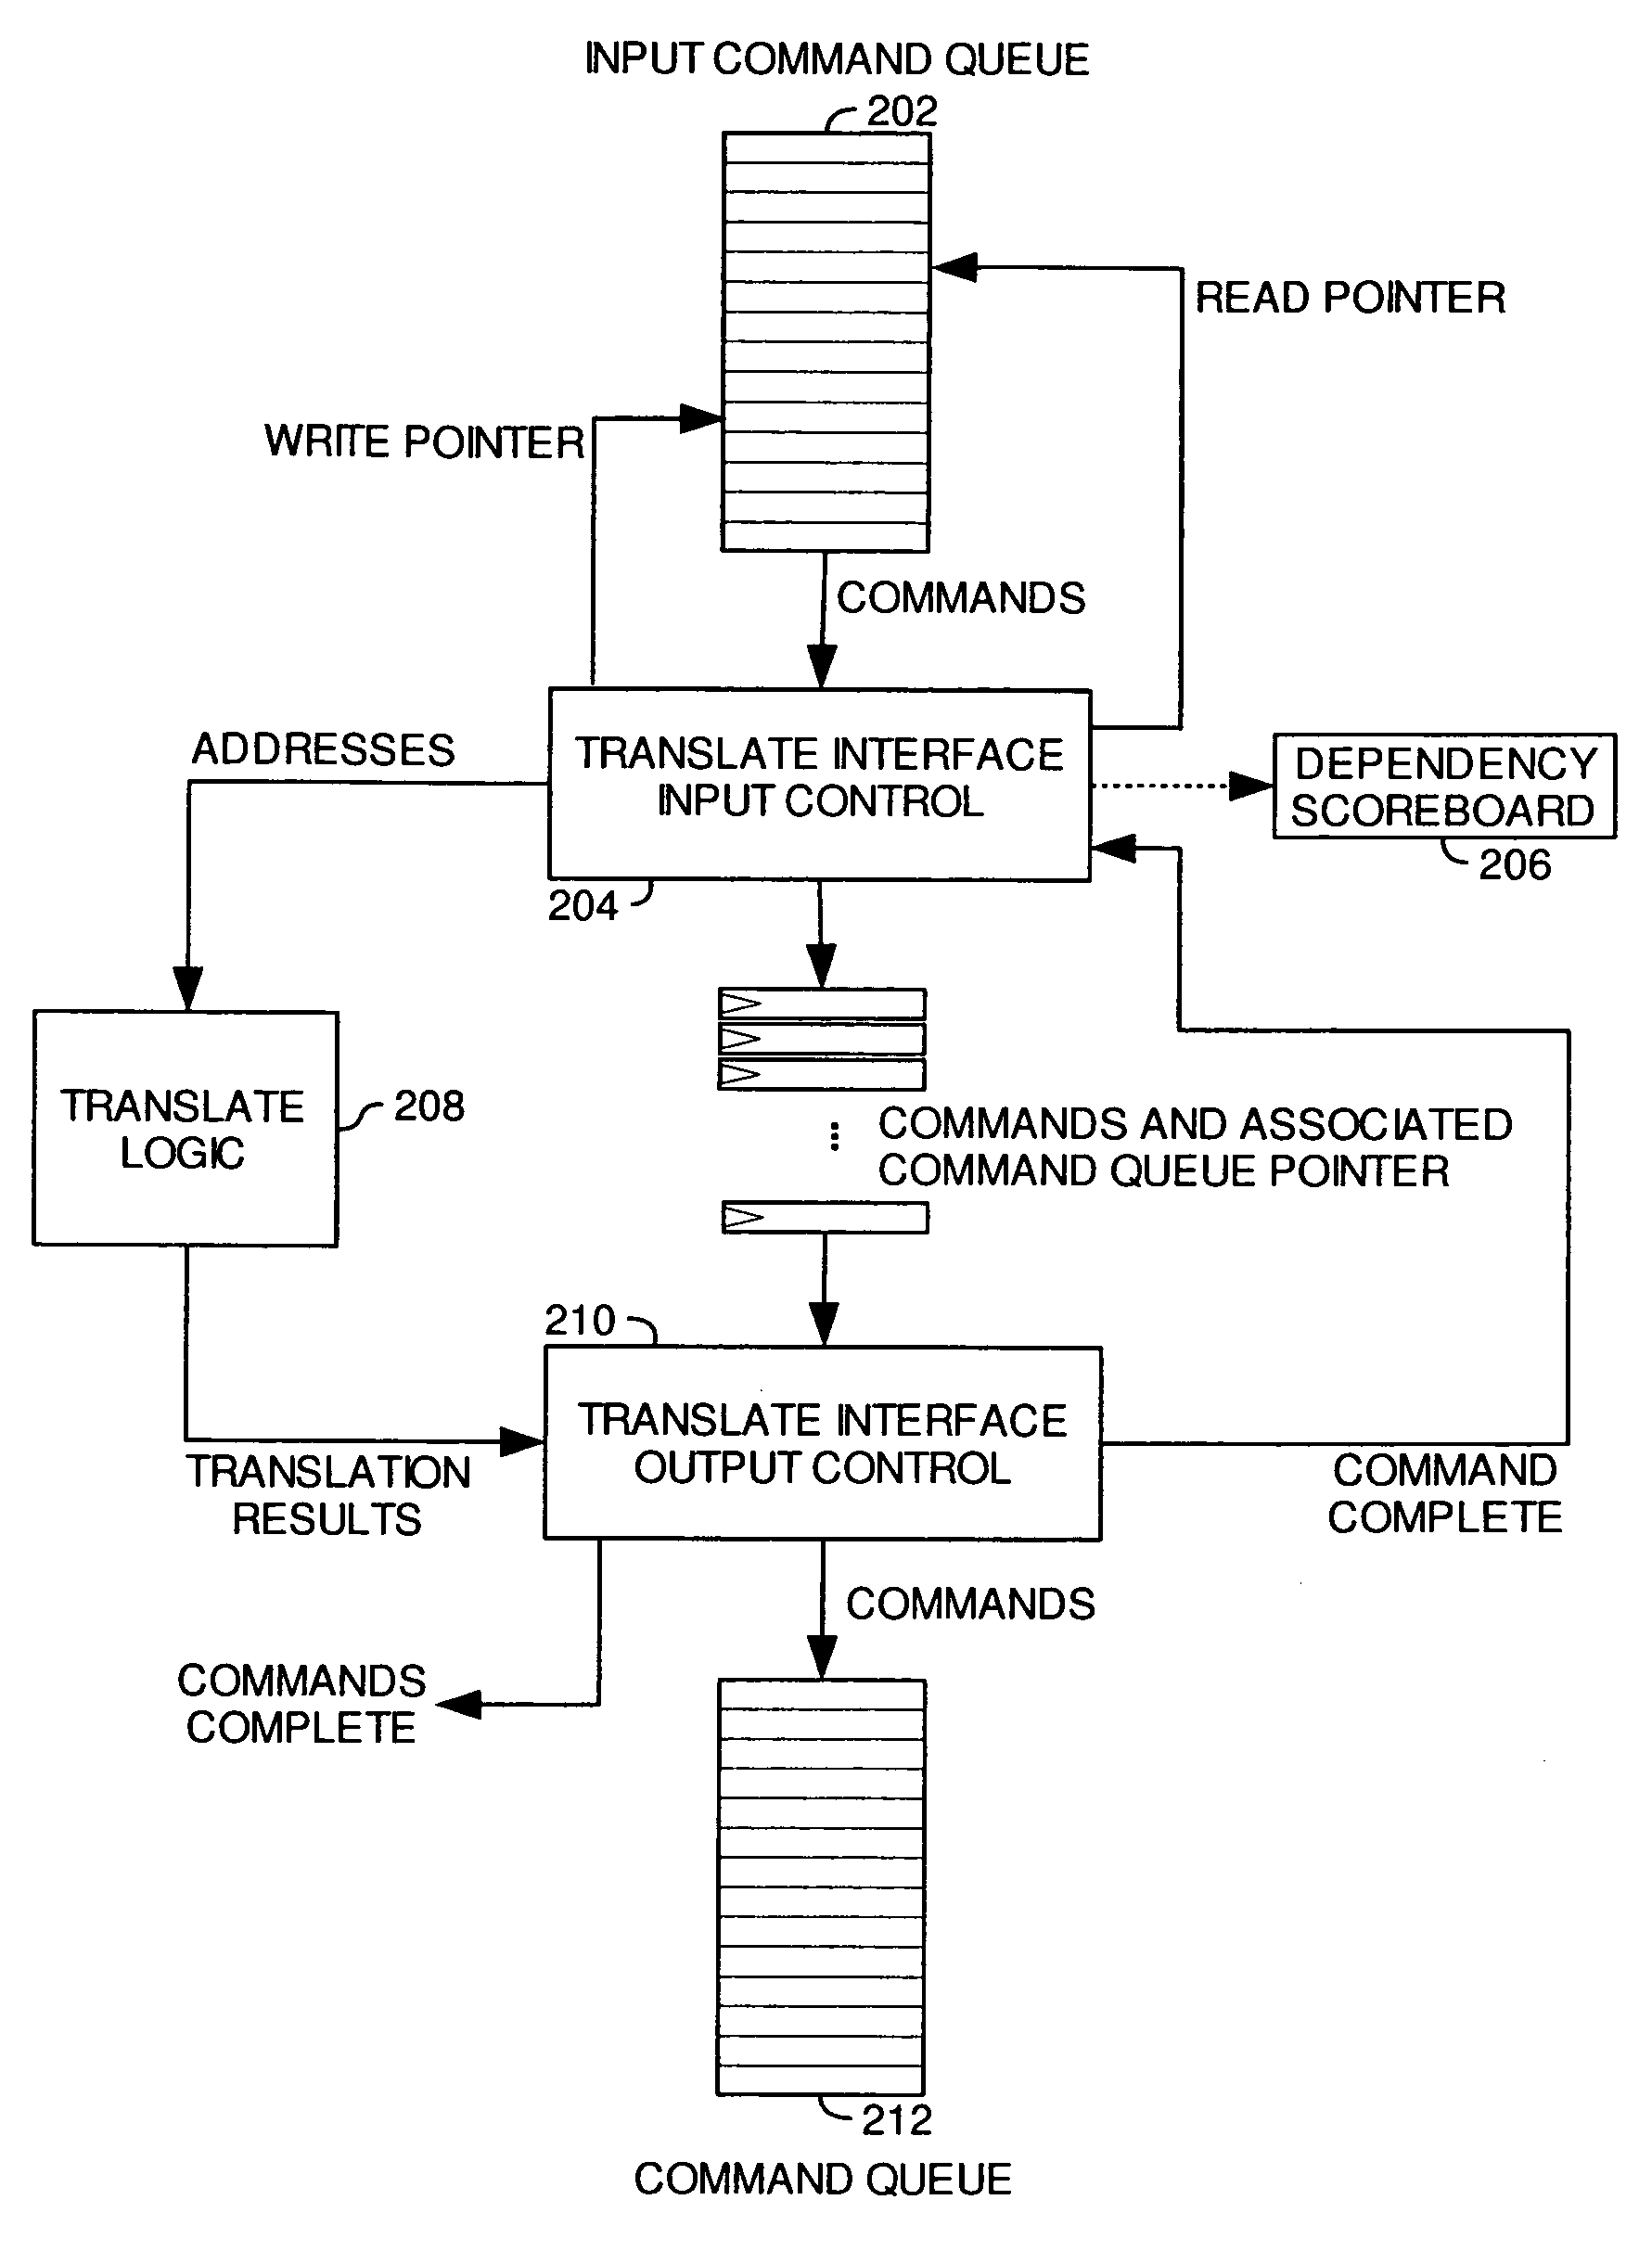 Method and apparatus for tracking command order dependencies